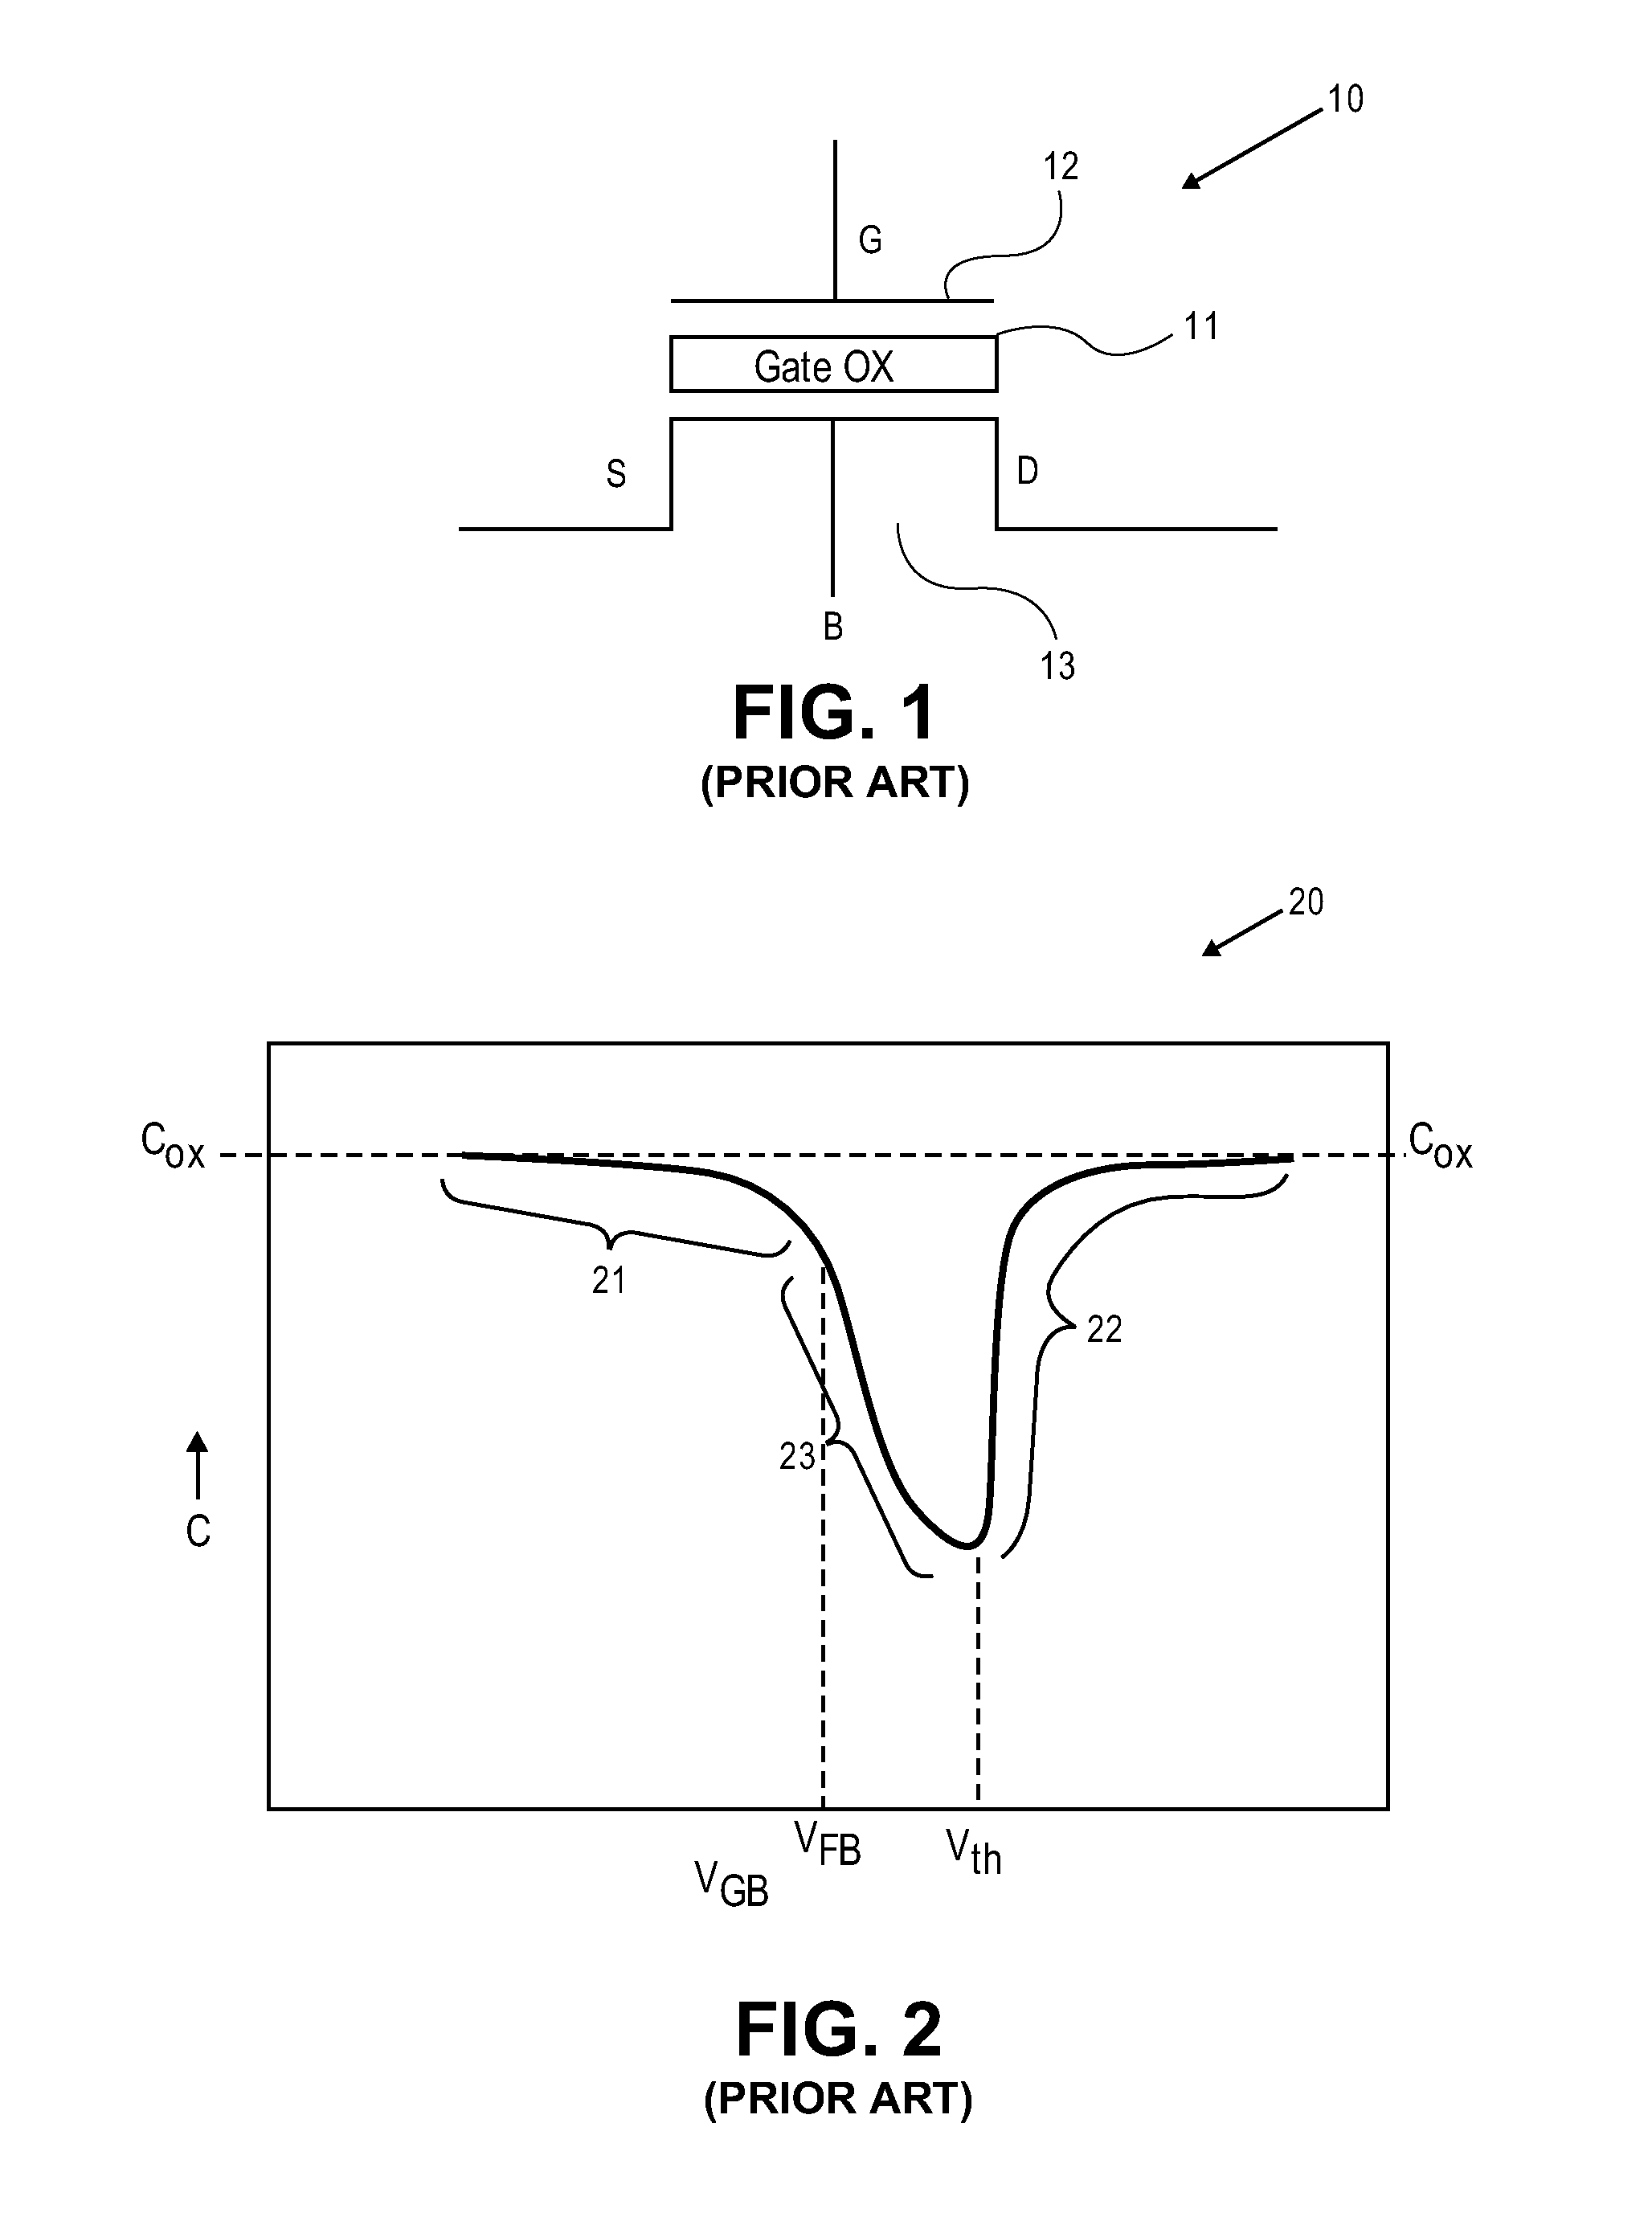 Mos capacitor structure and linearization method for reduced variation of the capacitance